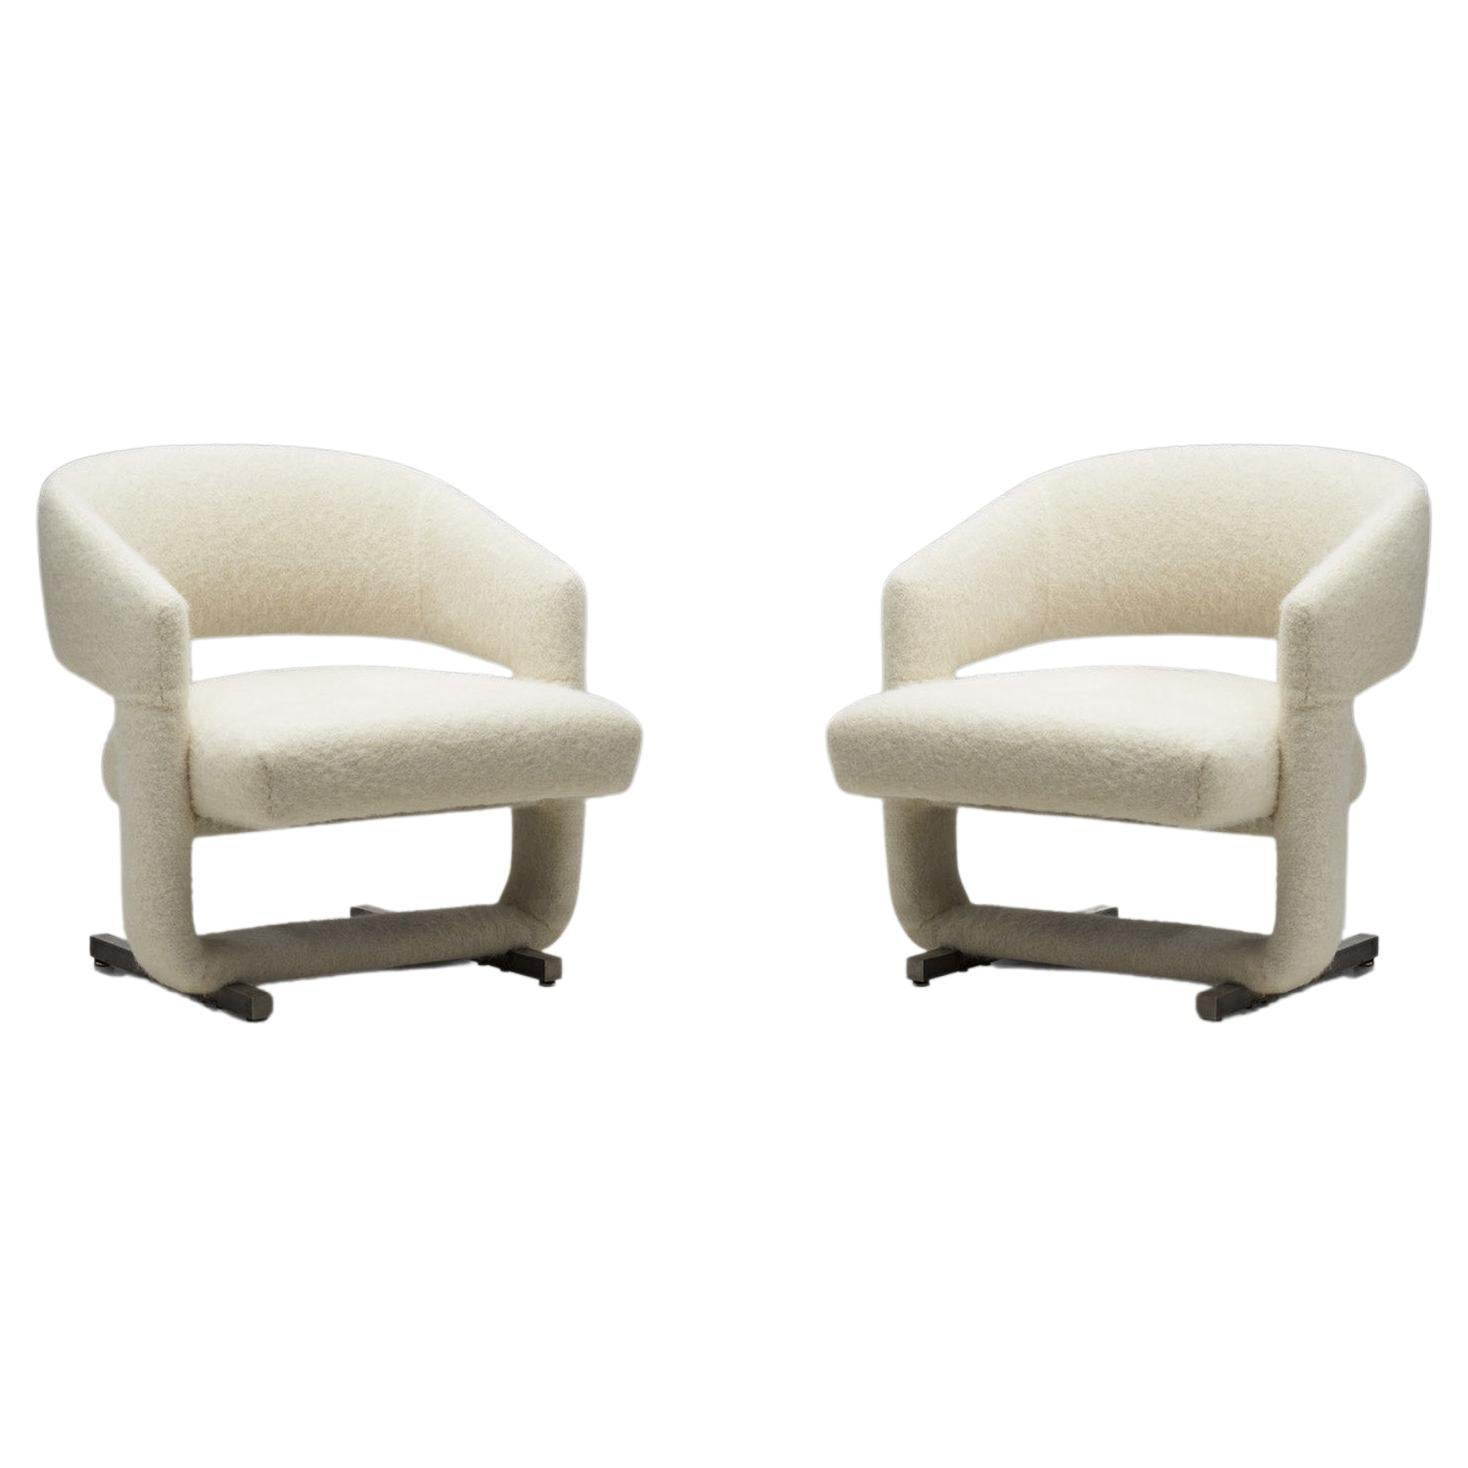 Sculptural Accent Chairs with Metal Legs, Europe, circa 1960s For Sale